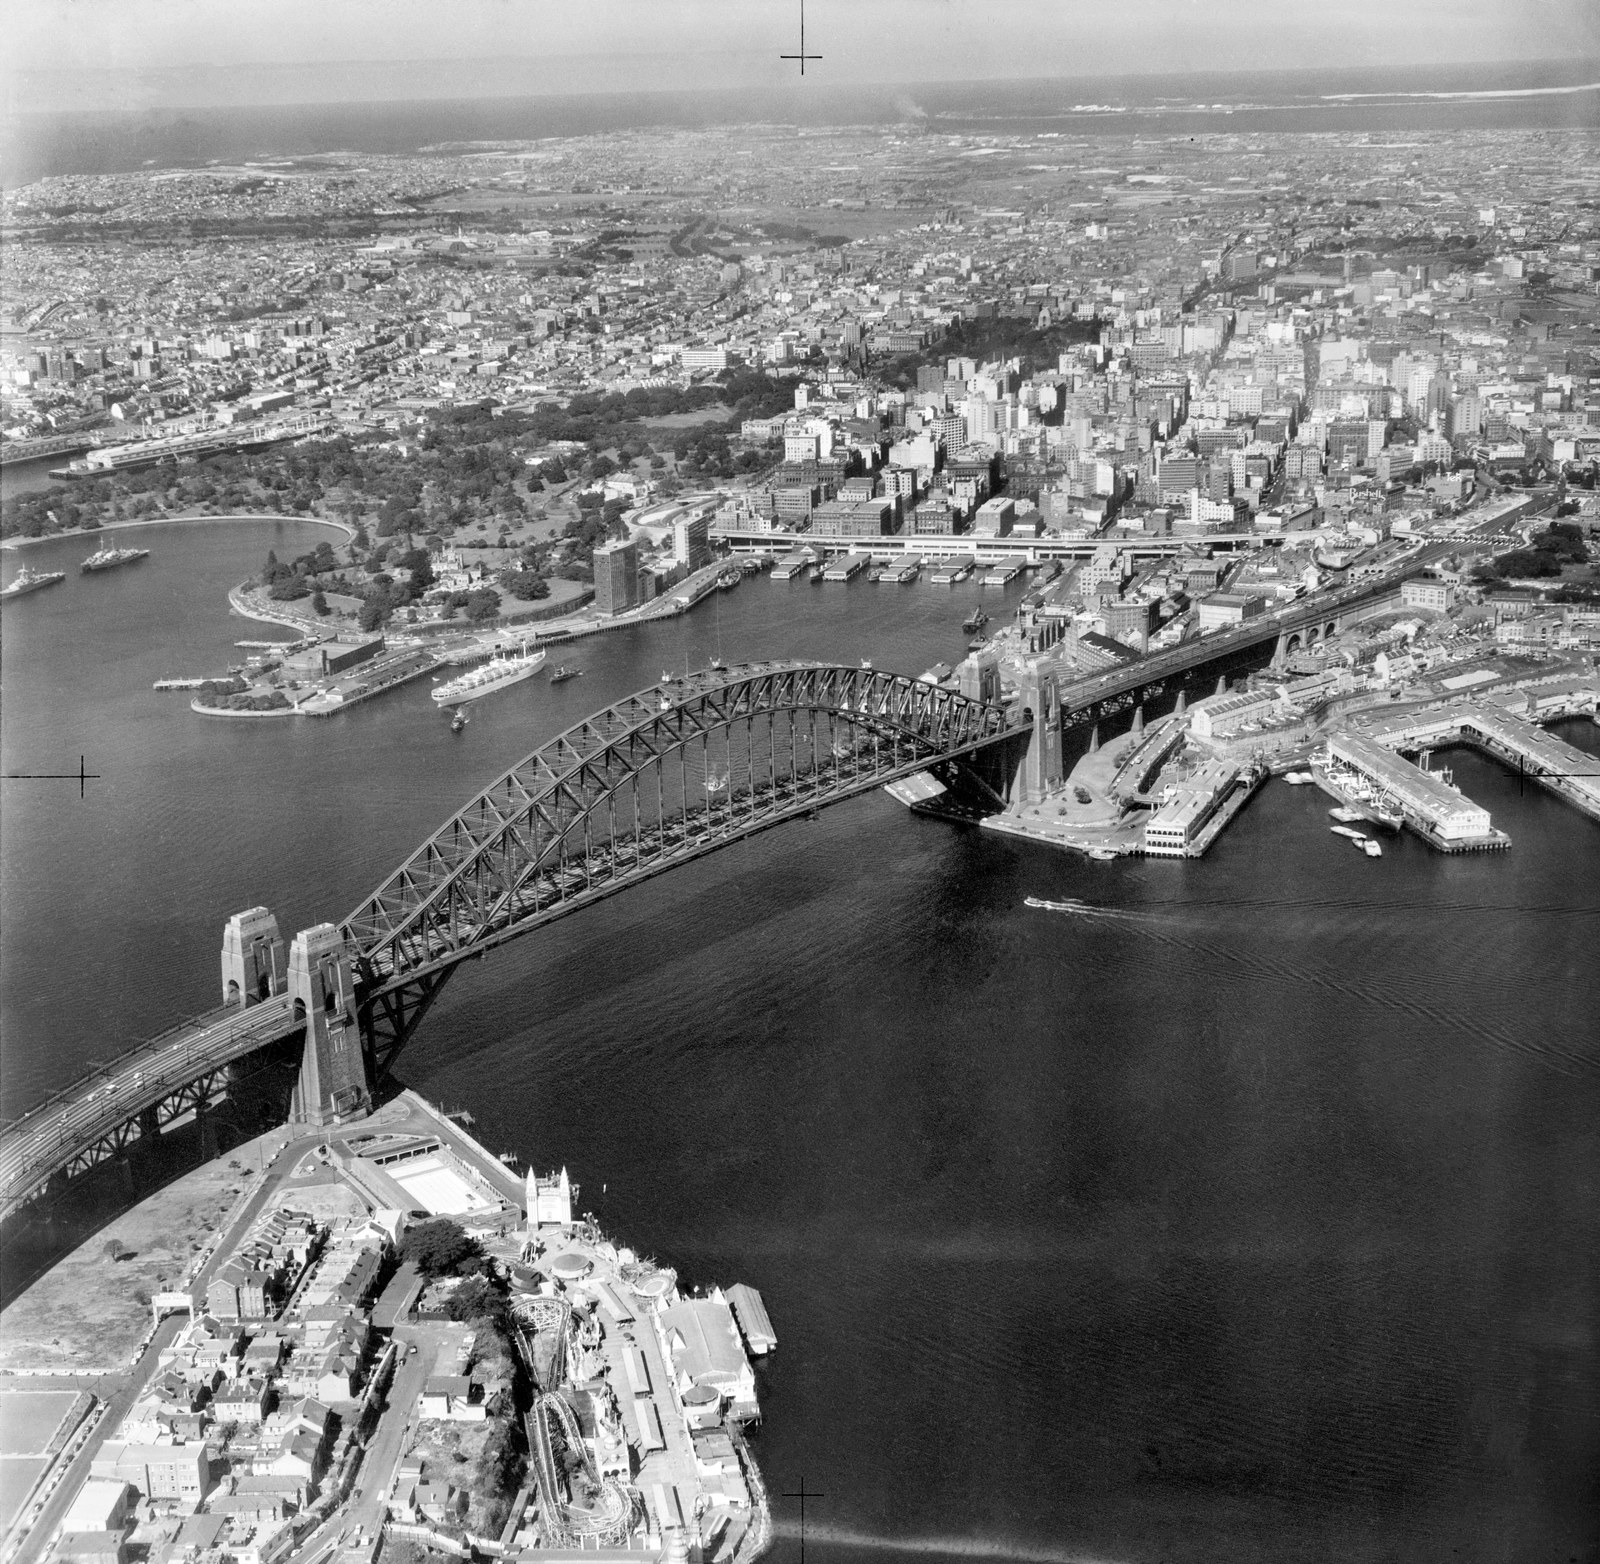 Aerial view of Sydney looking over the Harbour Bridge to Circular Quay. Photographer unknown, 1958. NATIONAL ARCHIVES OF AUSTRALIA:A1200, L27972